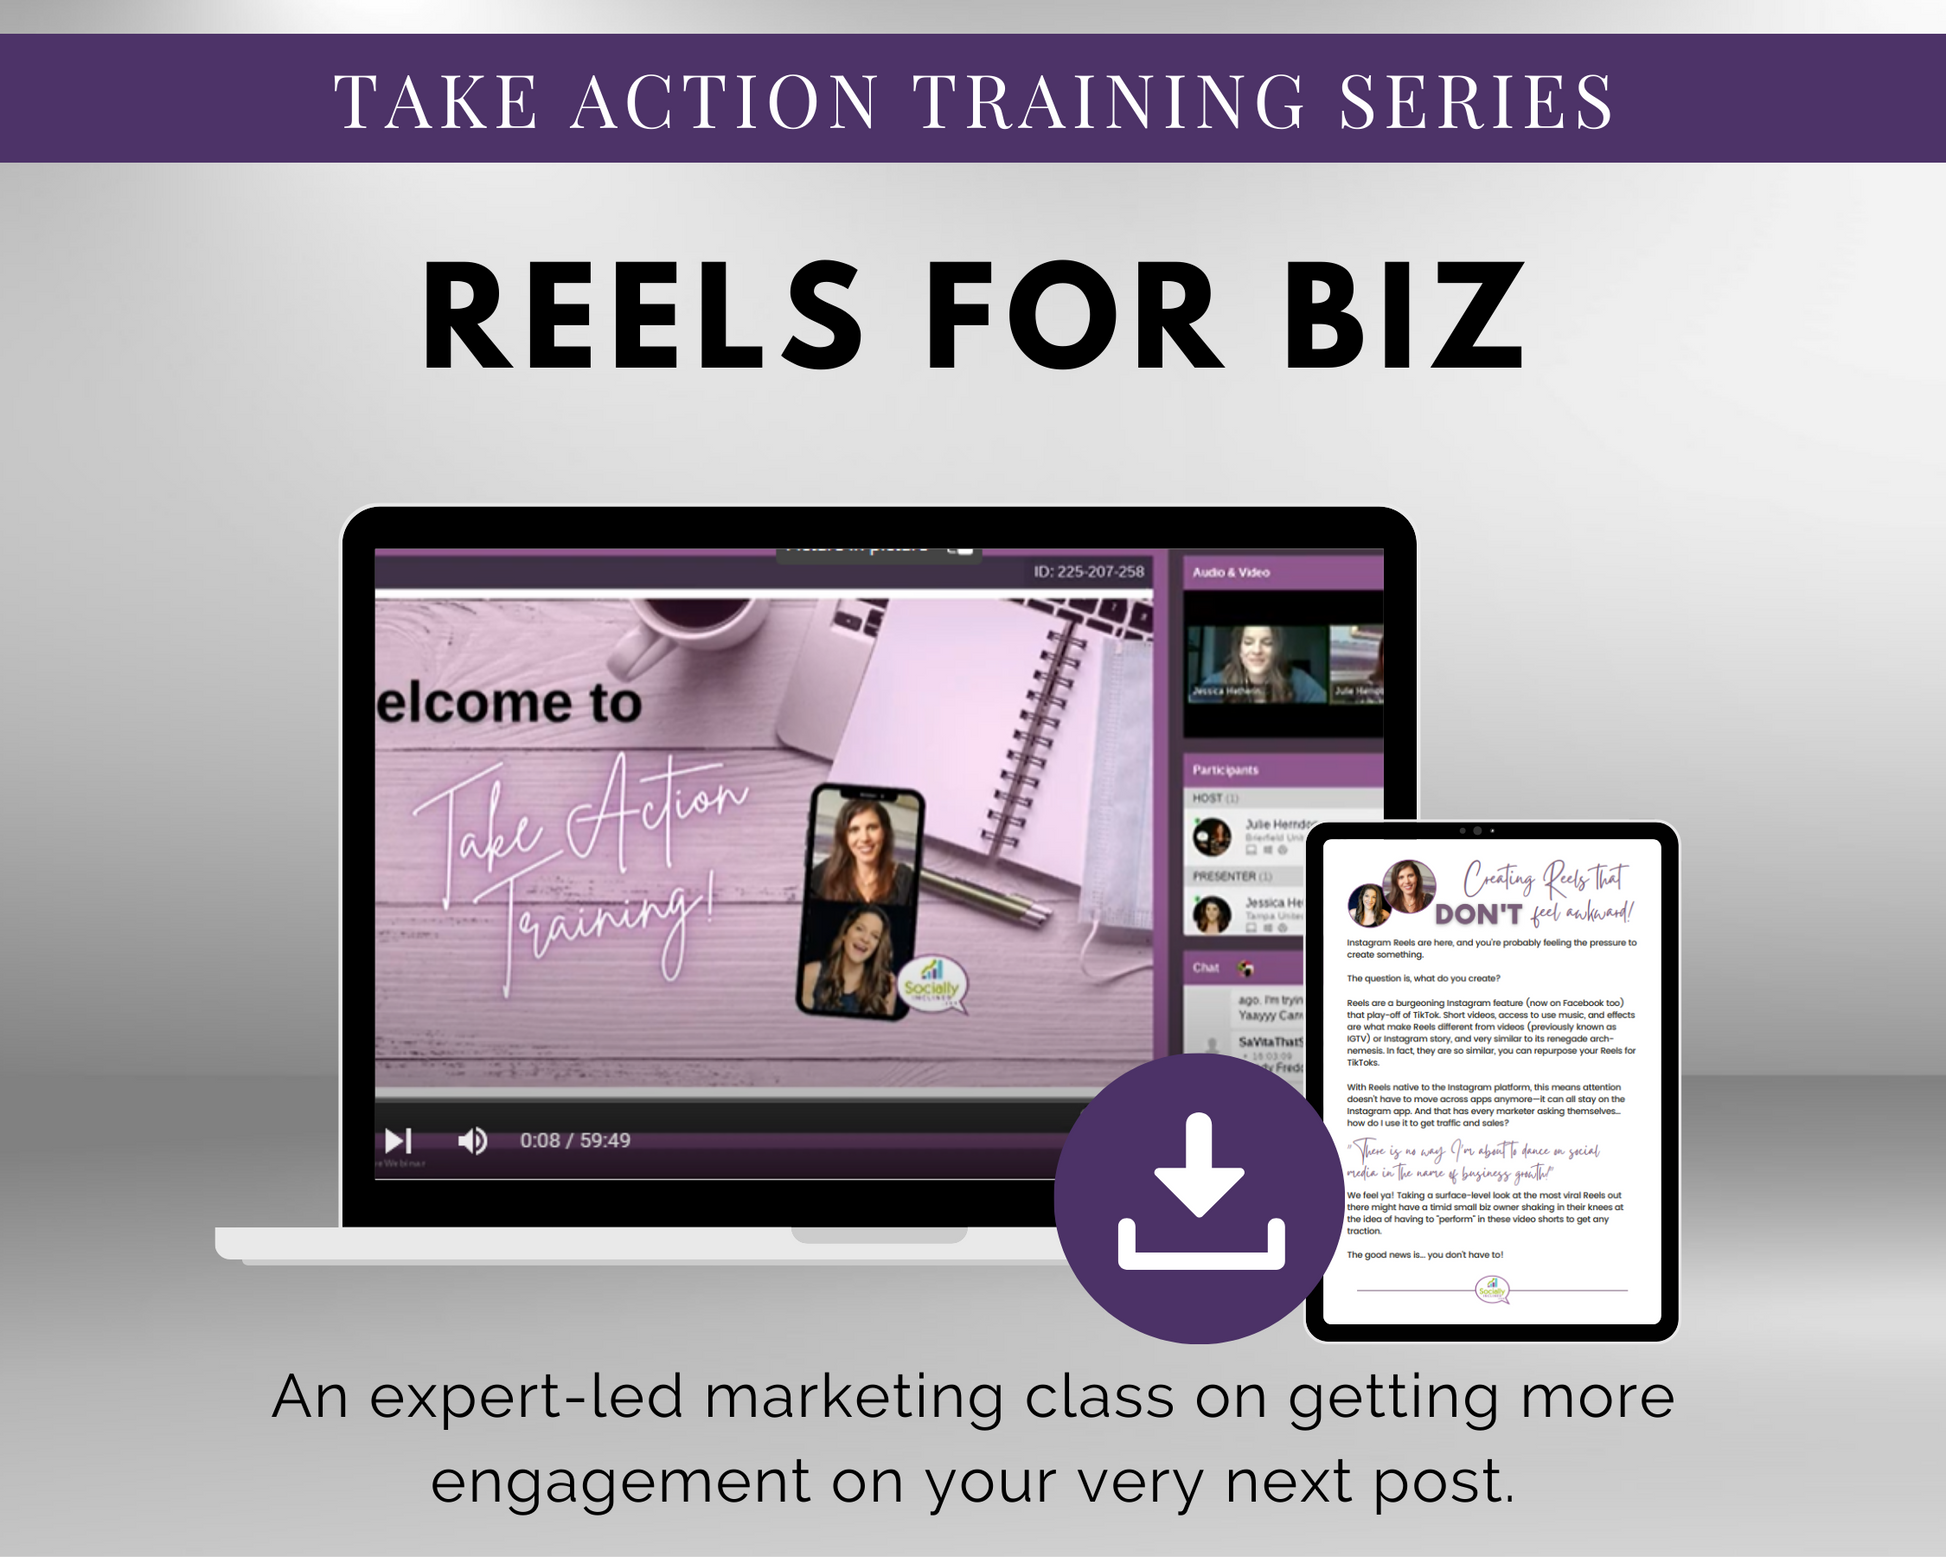 Take TAT - Reels For Biz Masterclass by Get Socially Inclined.